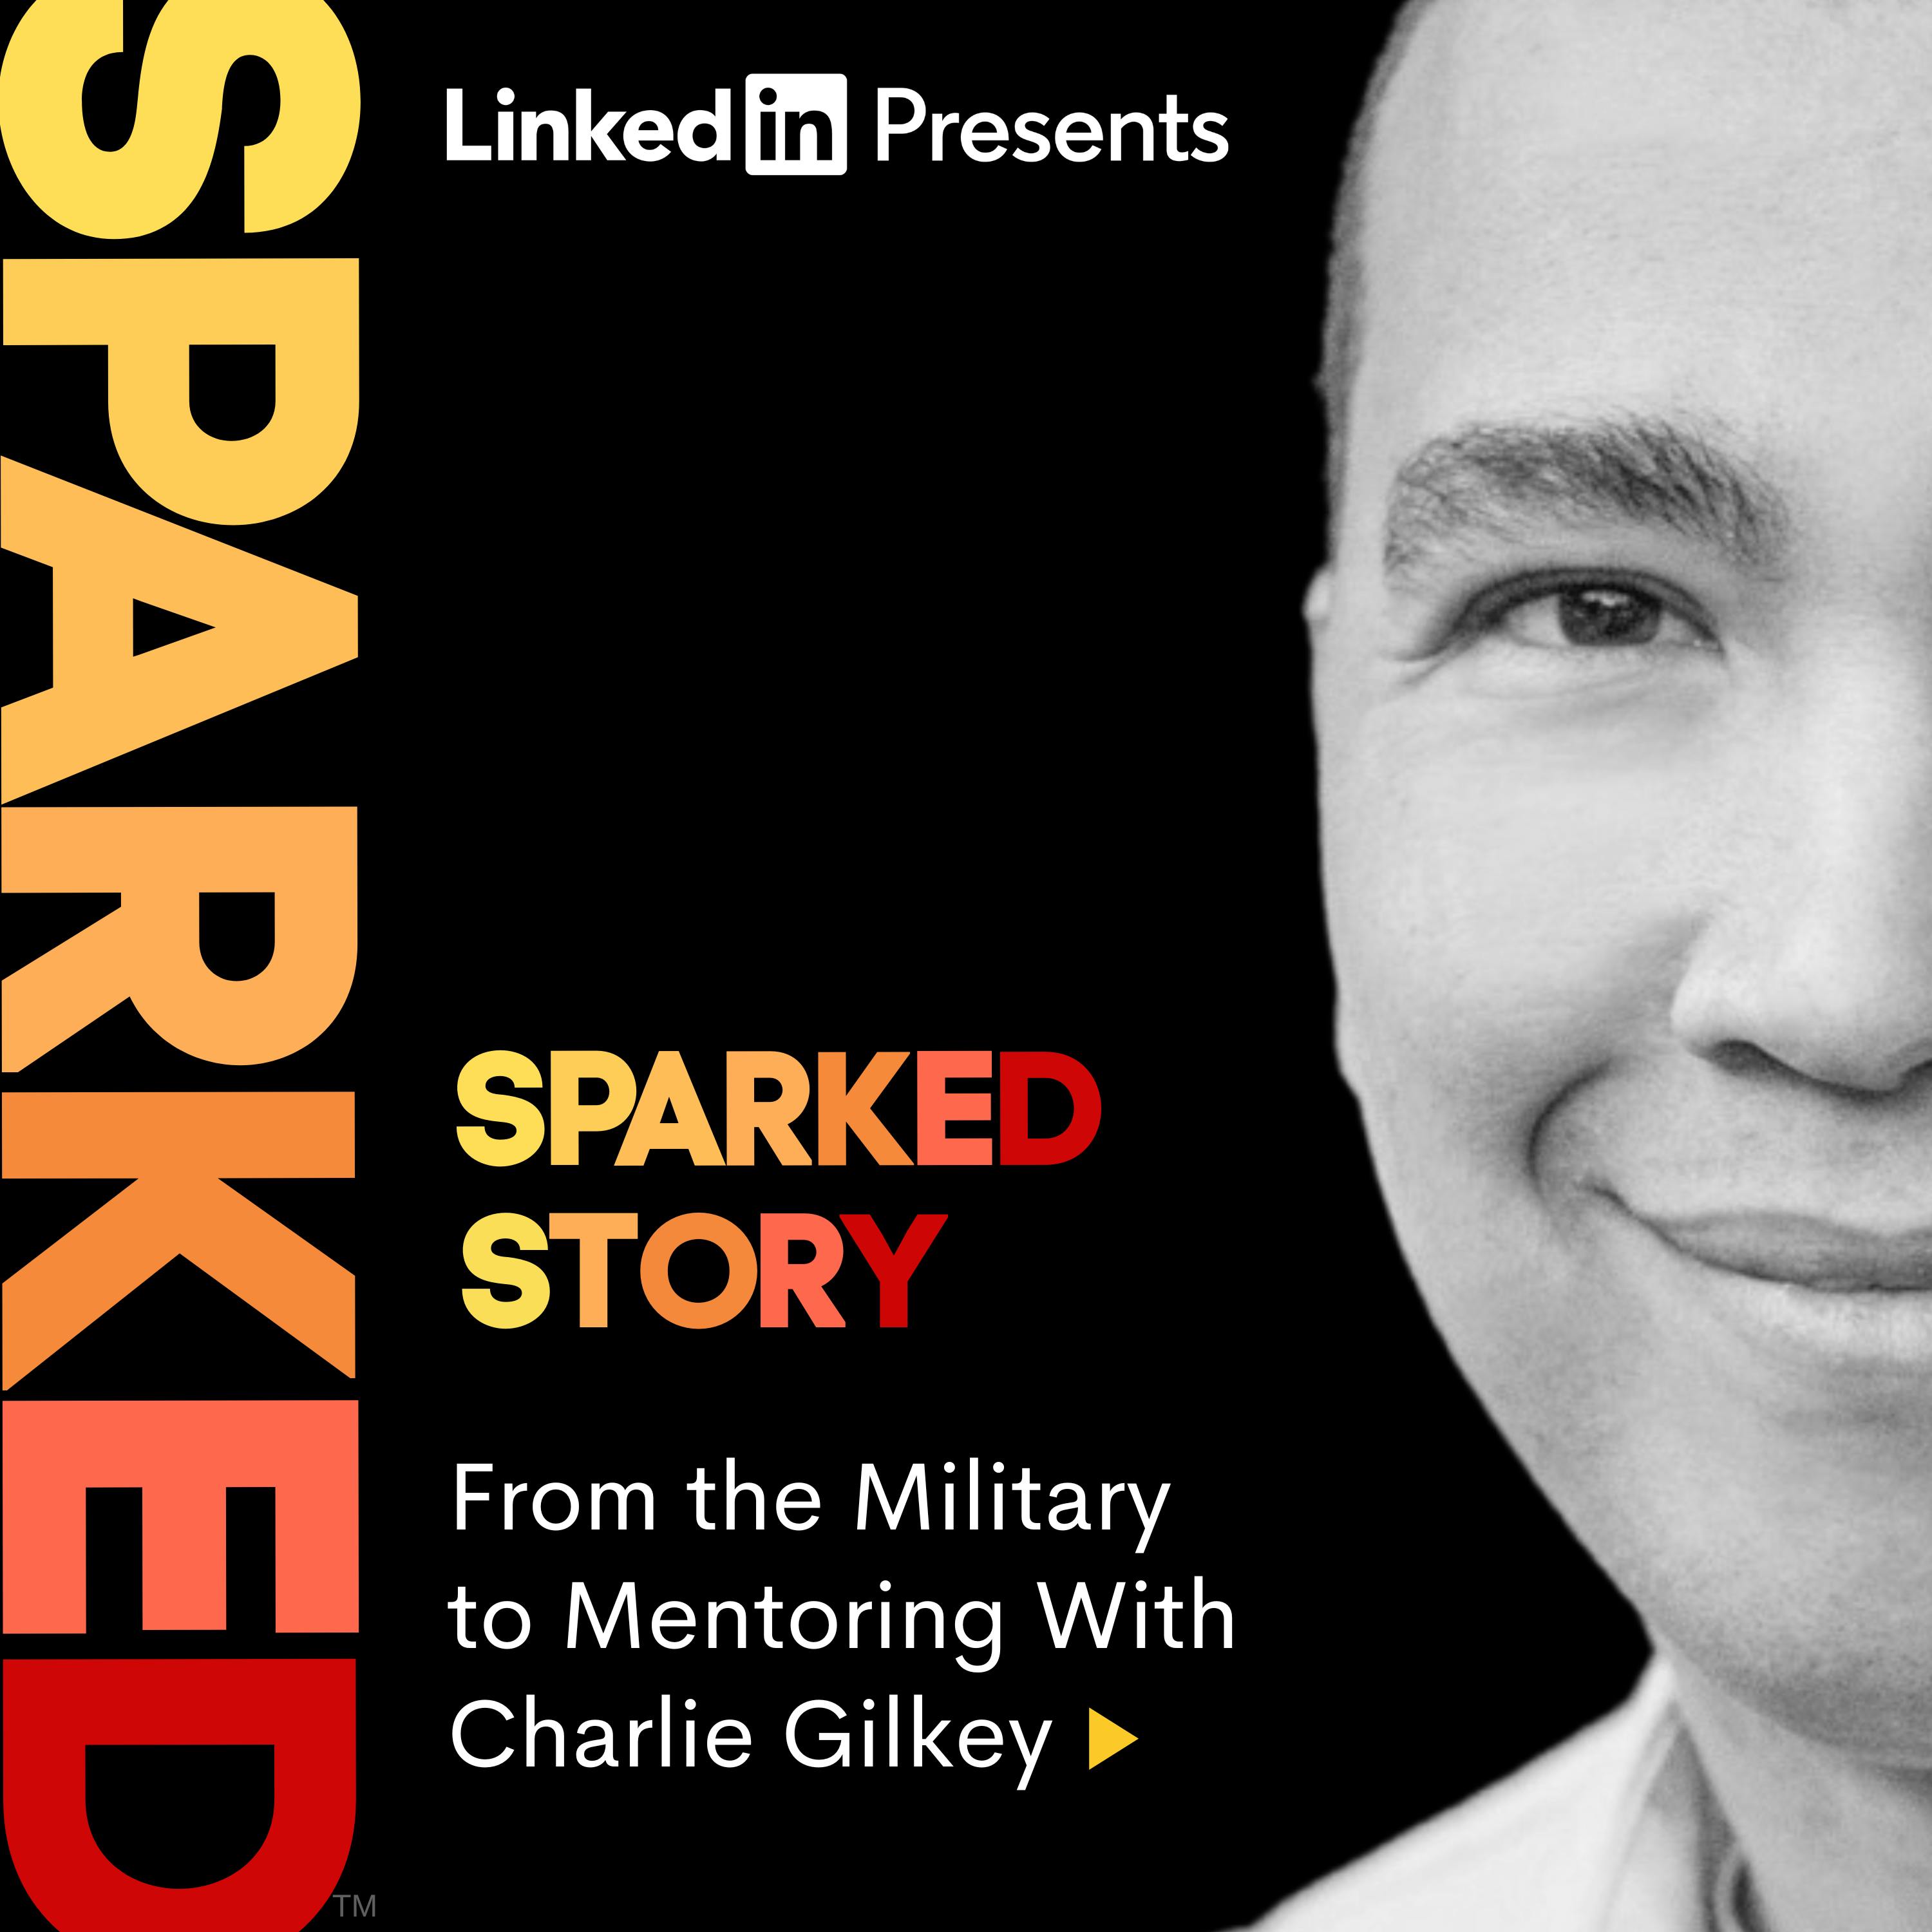 From the Military to Mentoring With Charlie Gilkey